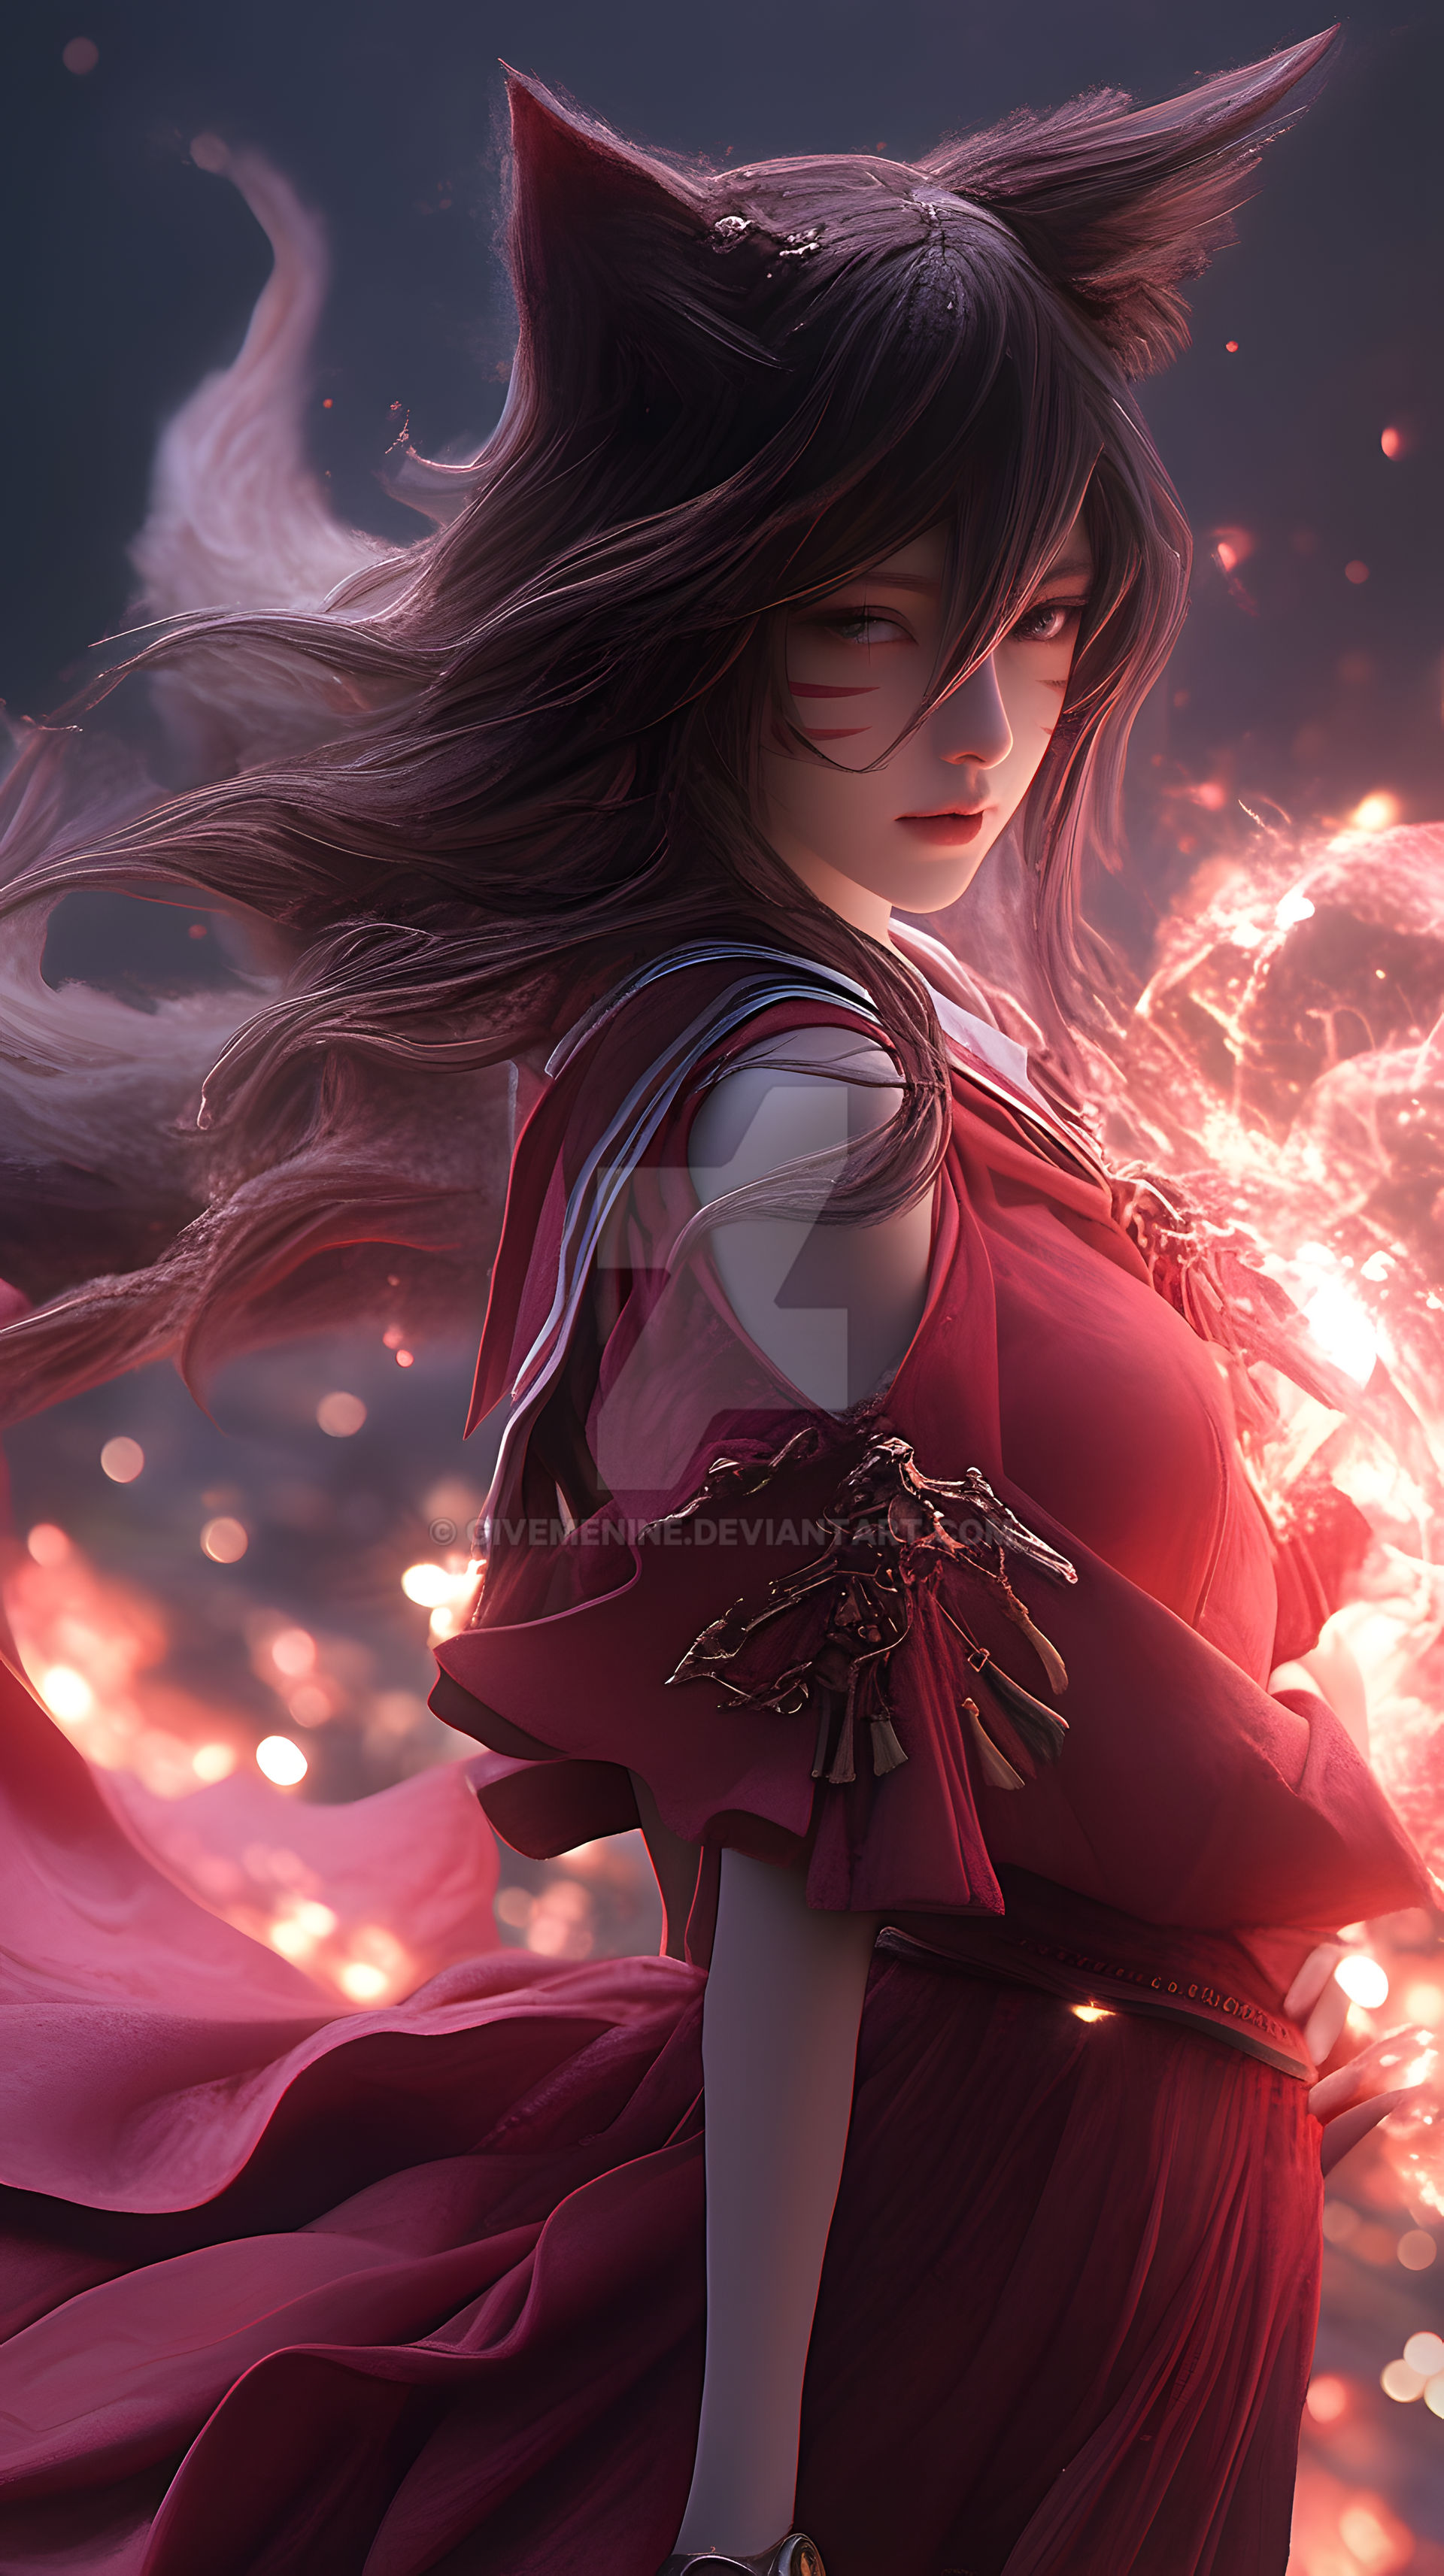 Anime poster of Ahri from League of Legends by GiveMeNine on DeviantArt